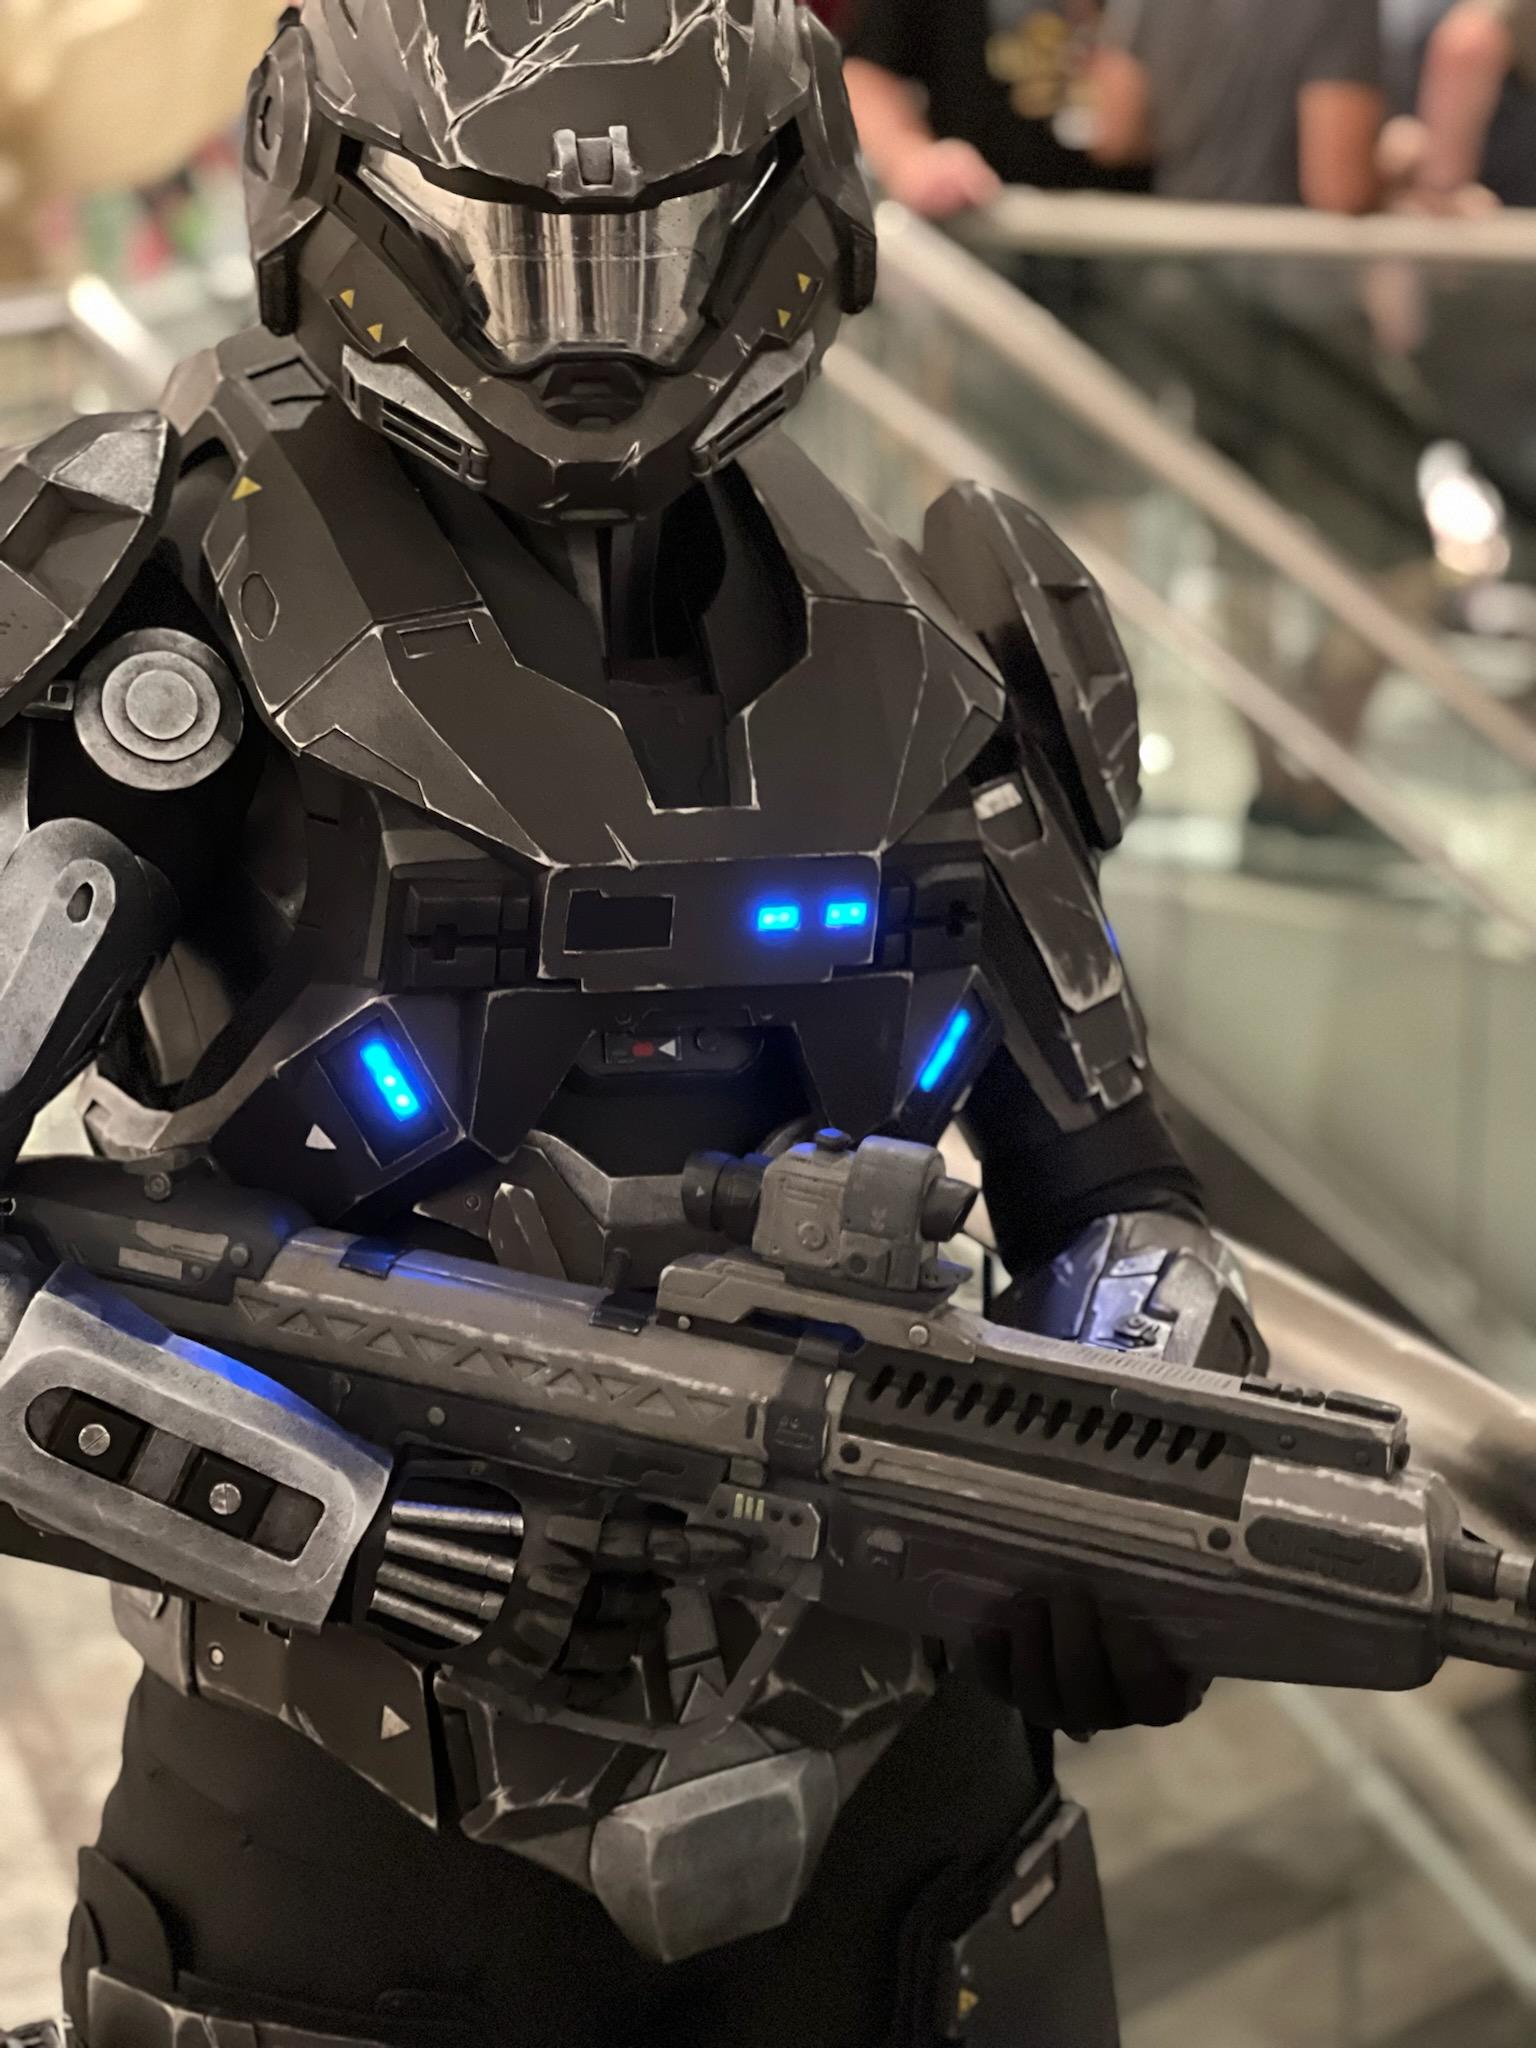 Detailed Reach armor + Undersuit | Page 4 | Halo Costume and Prop Maker ...